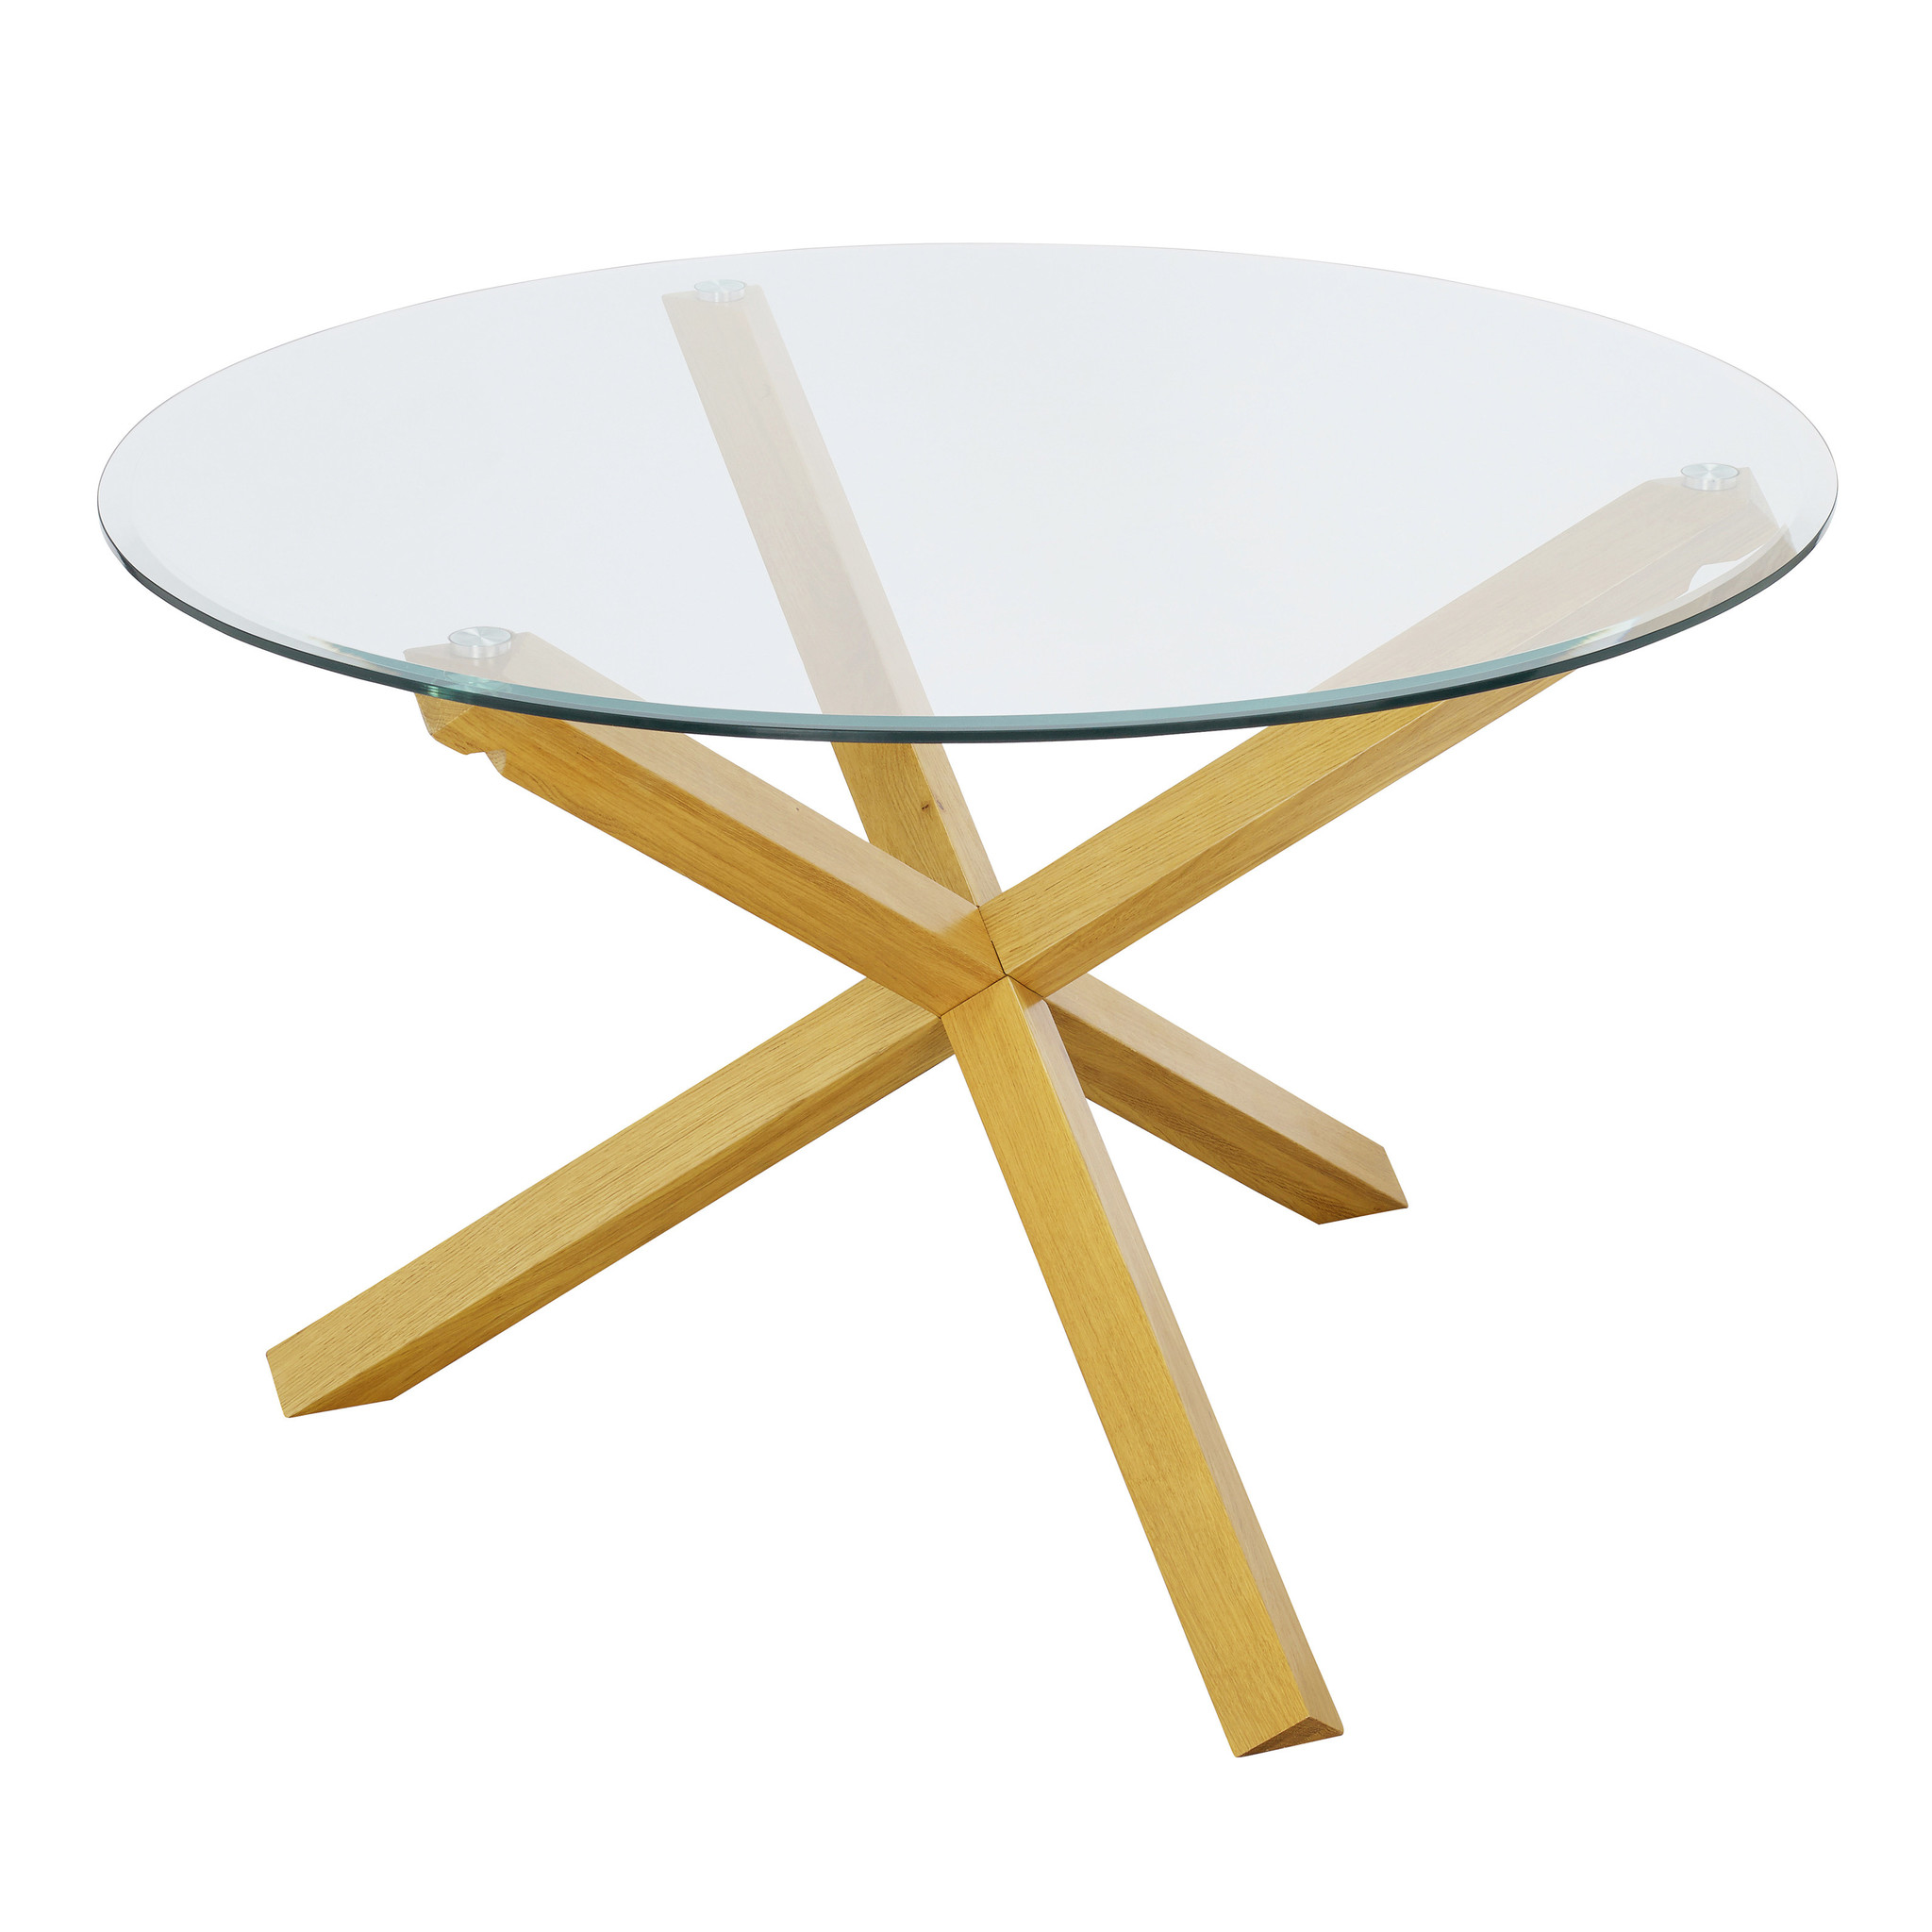 LPD Oporto Round Dining Table